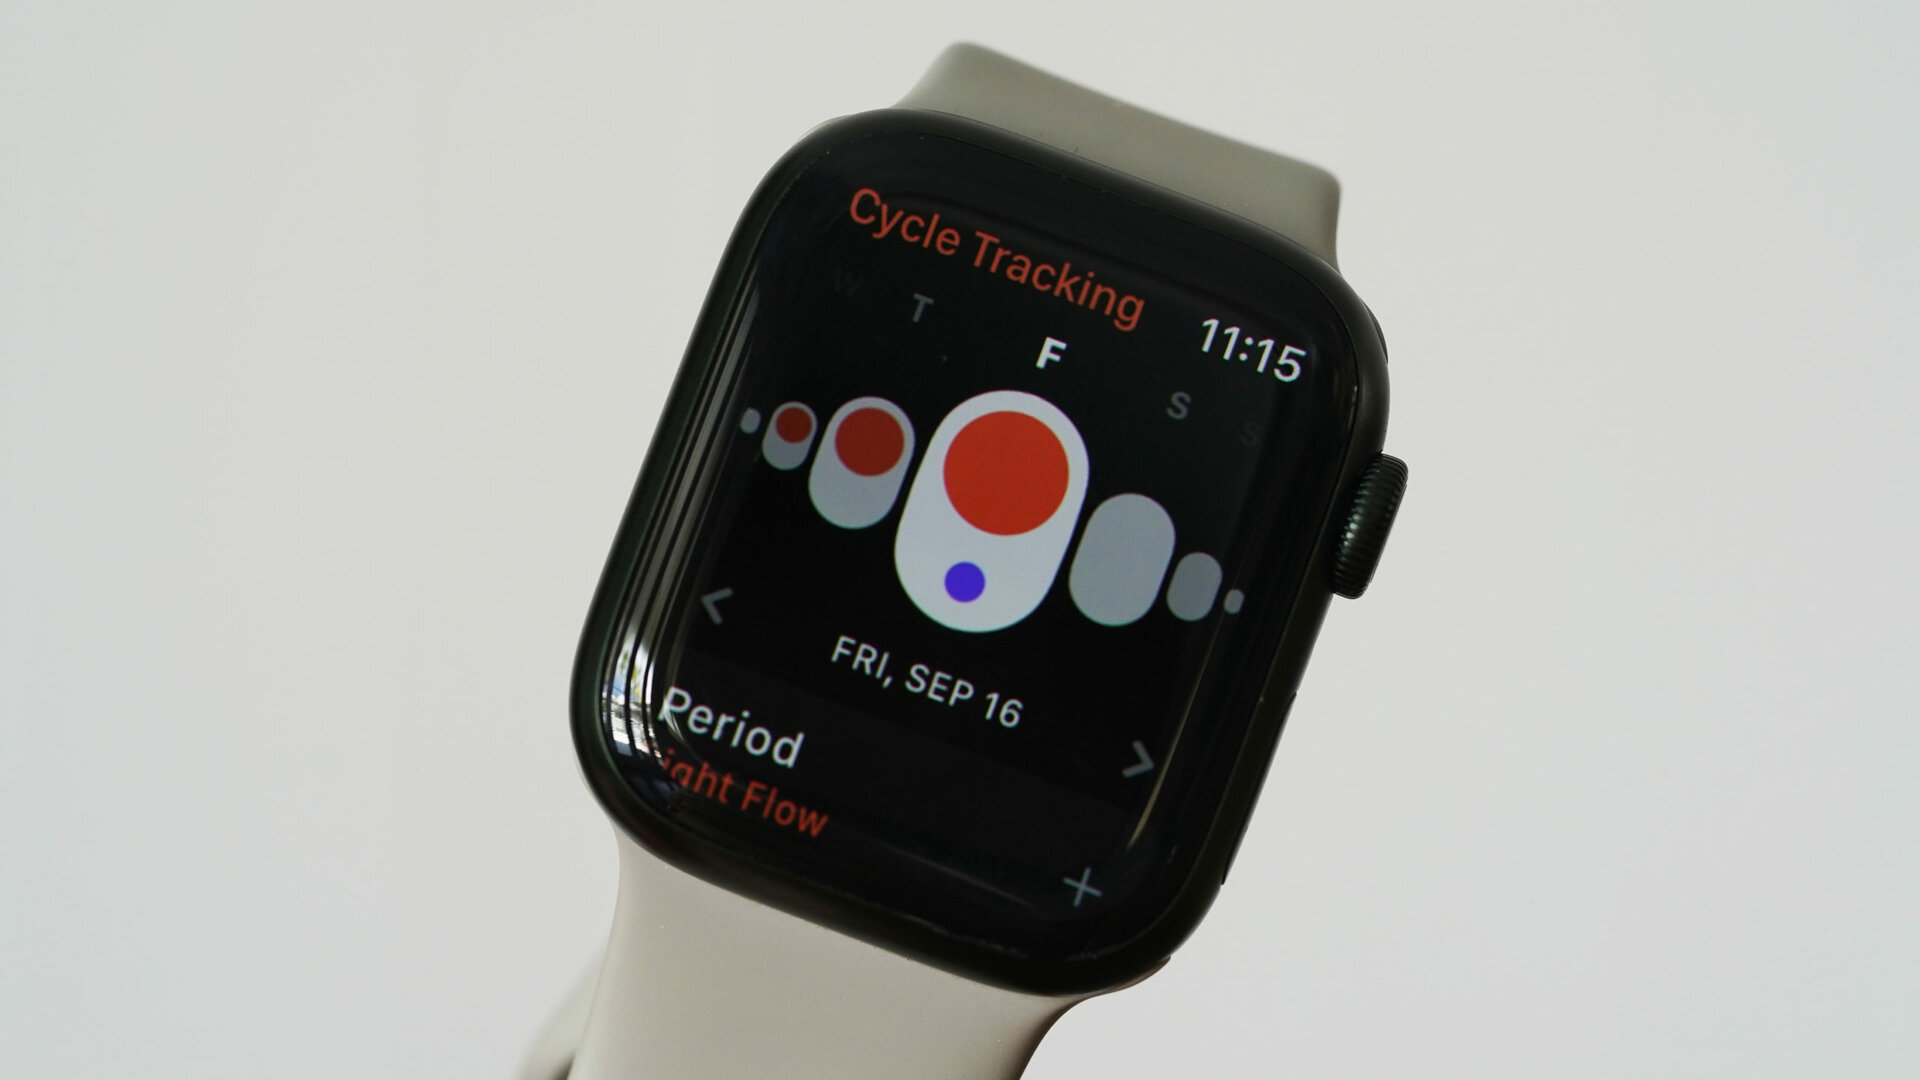 An Apple Watch Series 7 displays a user's logged period in the Cycle Tracking app.